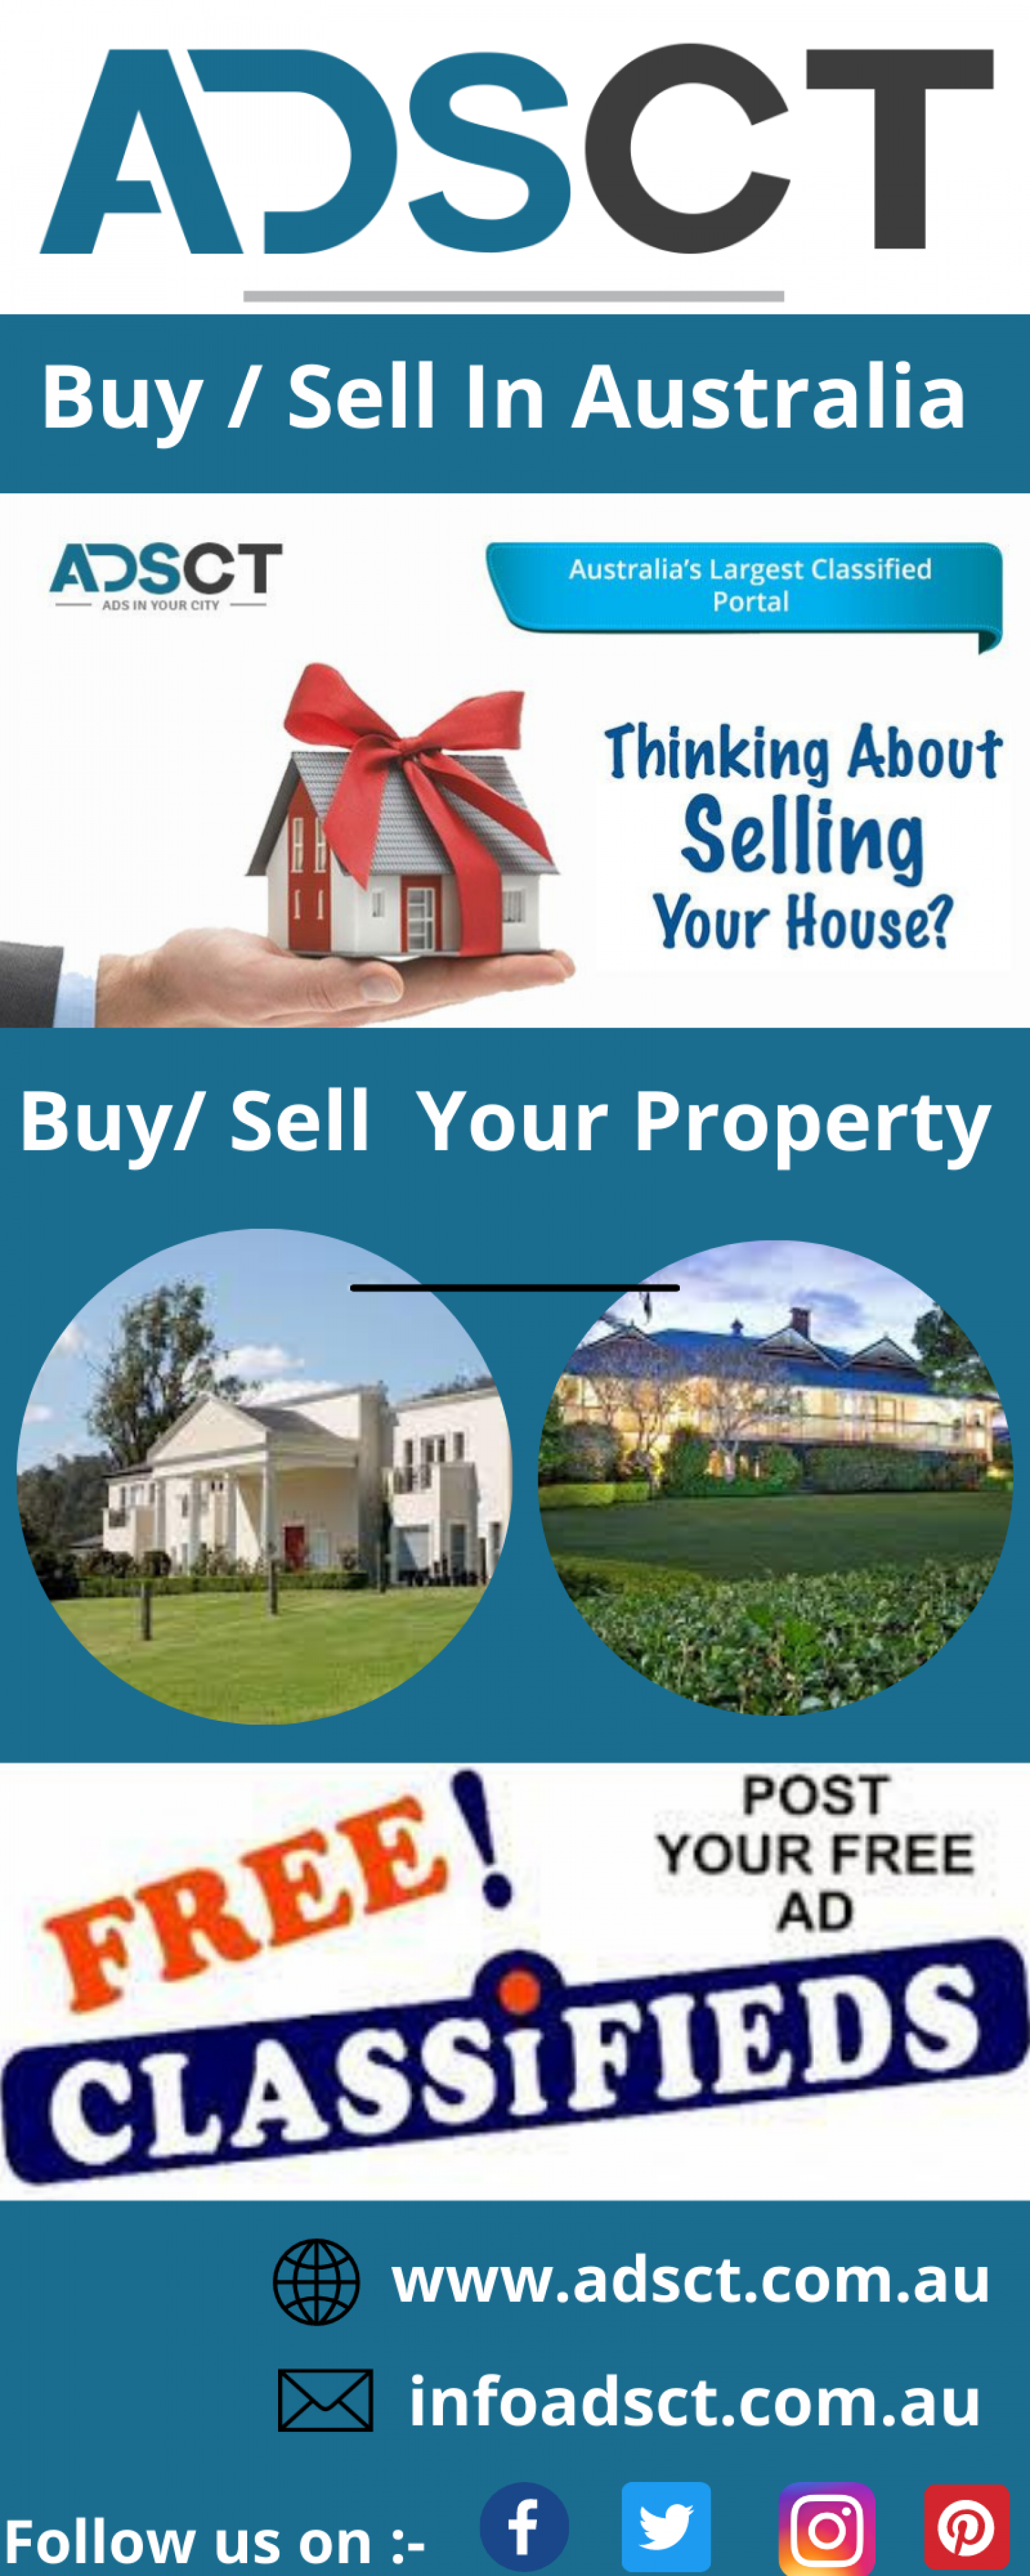 Houses for sale Adelaide | Adsct Classified  Infographic